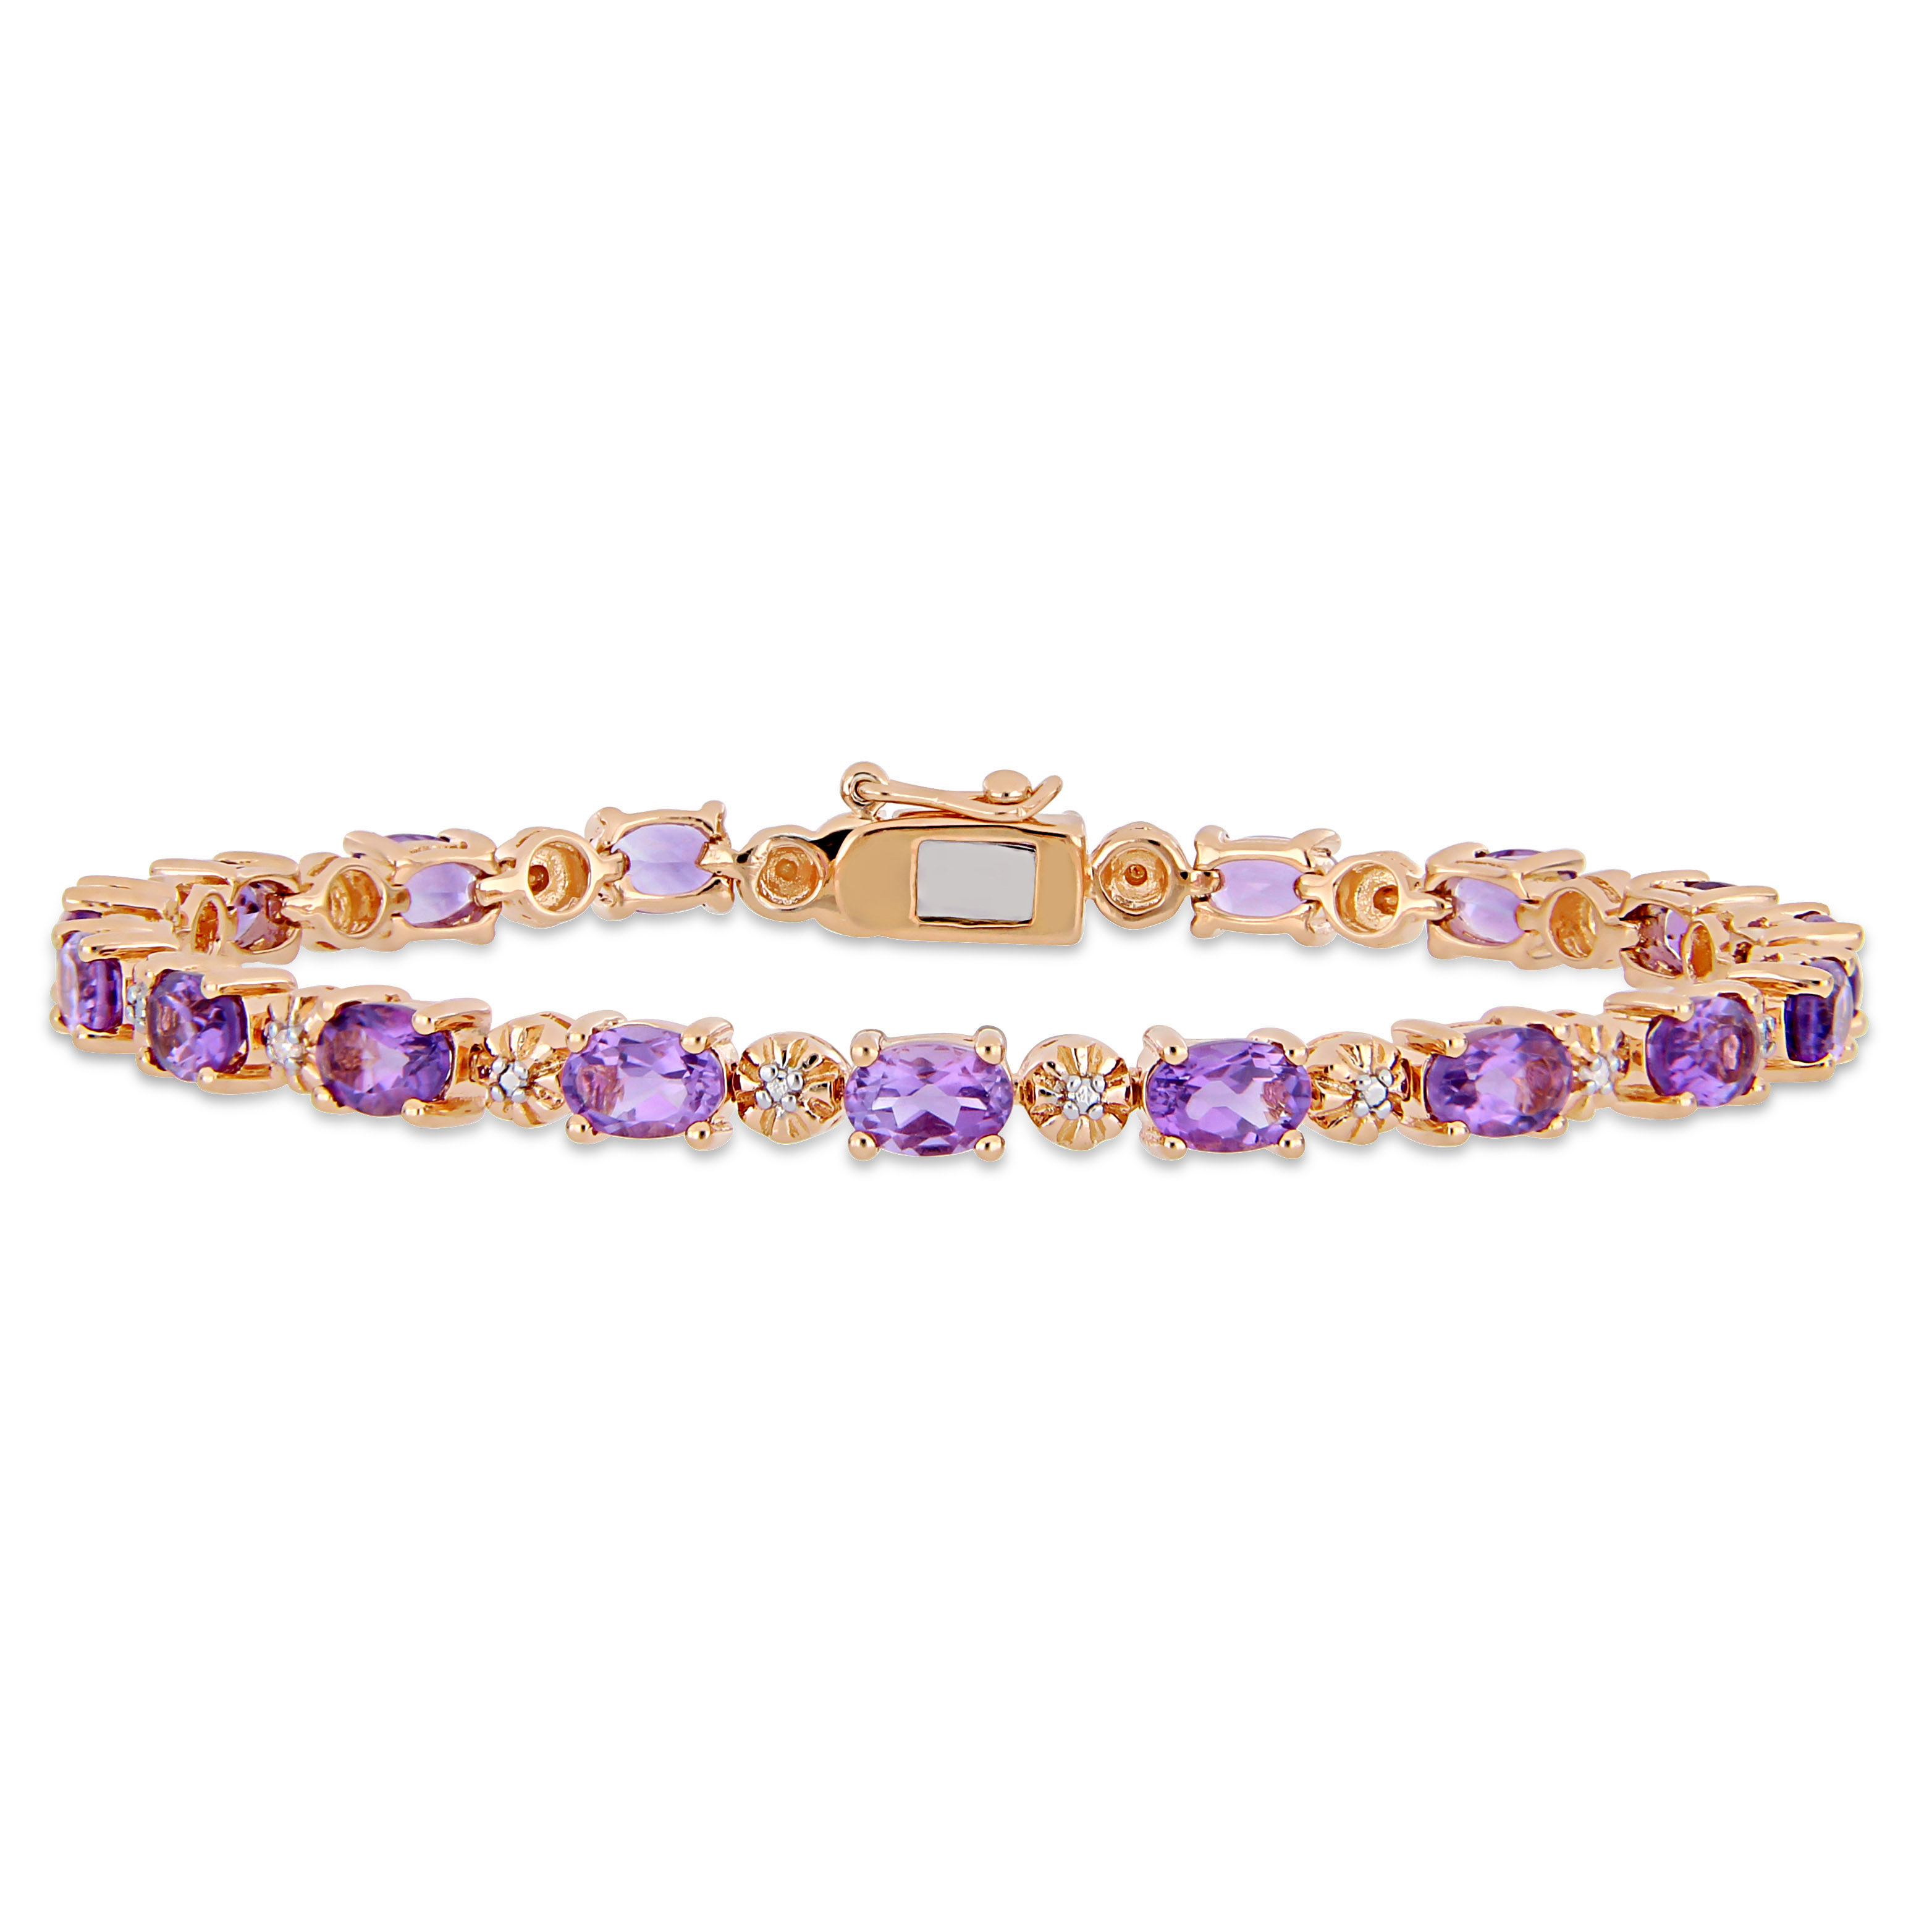 7-1/5 CT TGW Oval-Cut Amethyst and Diamond Accent Tennis Bracelet in Rose Plated Sterling Silver